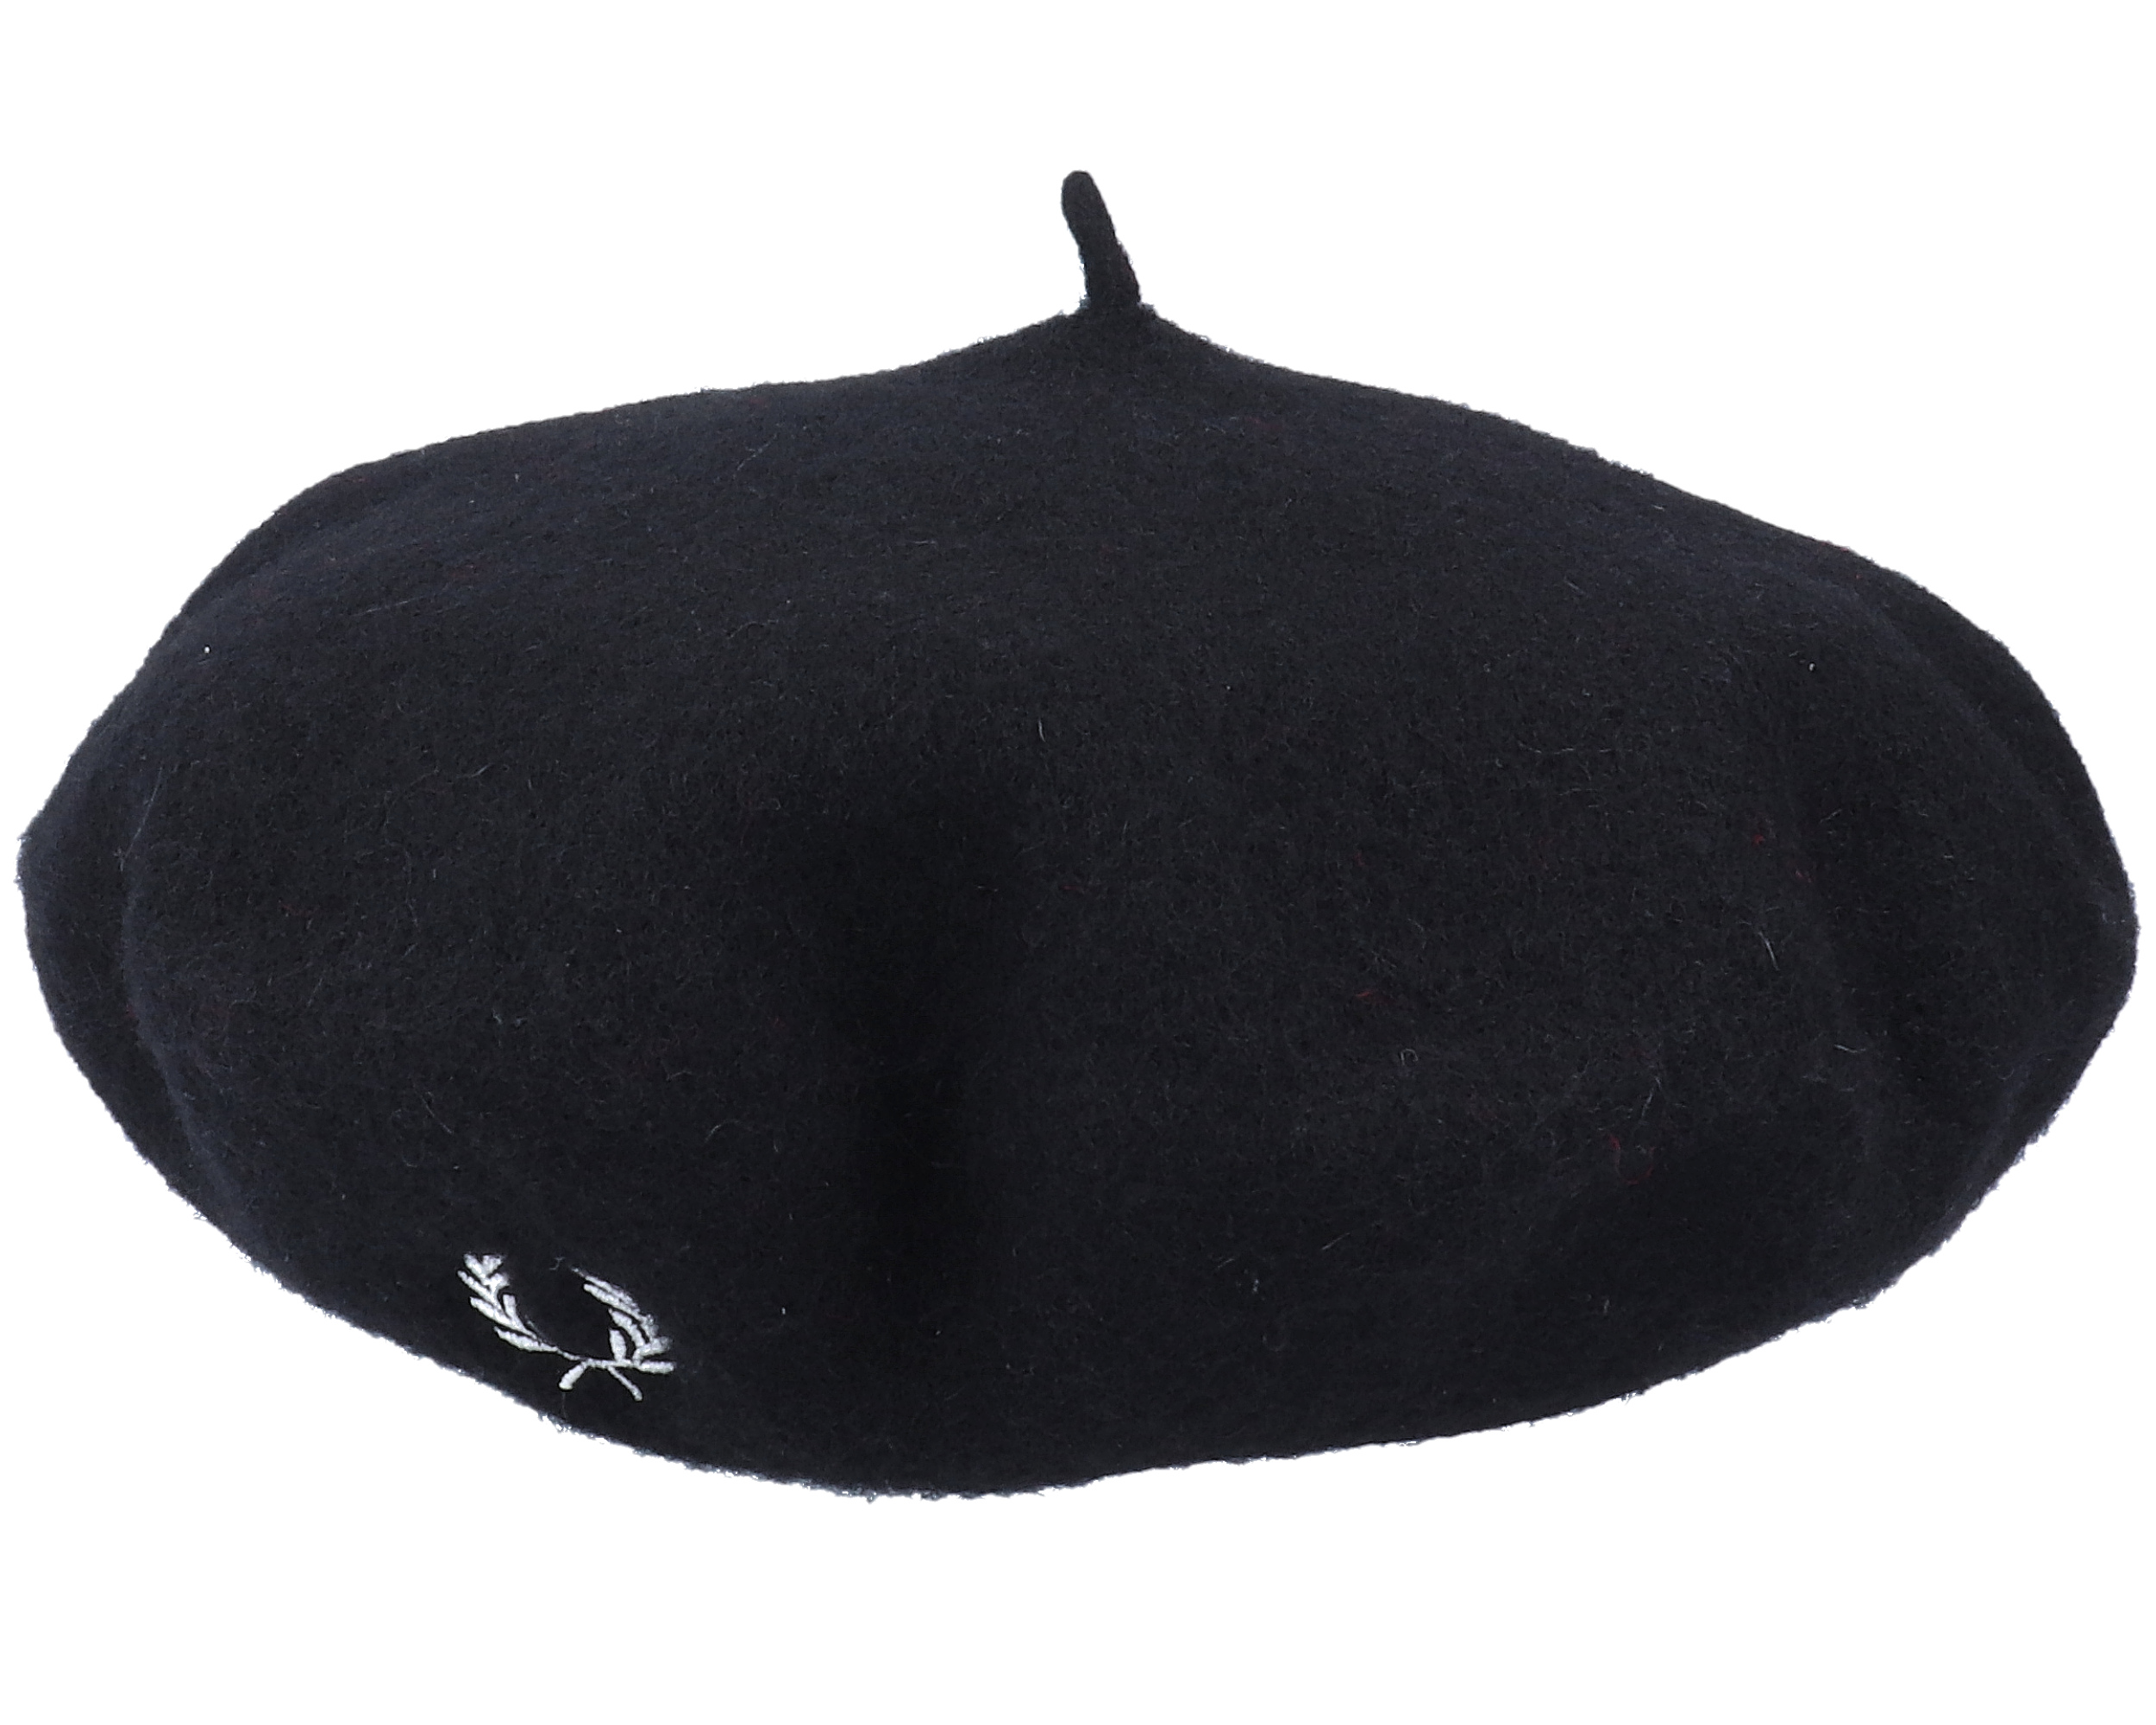 Black Beret - Fred Perry hats | Hatstore.co.uk